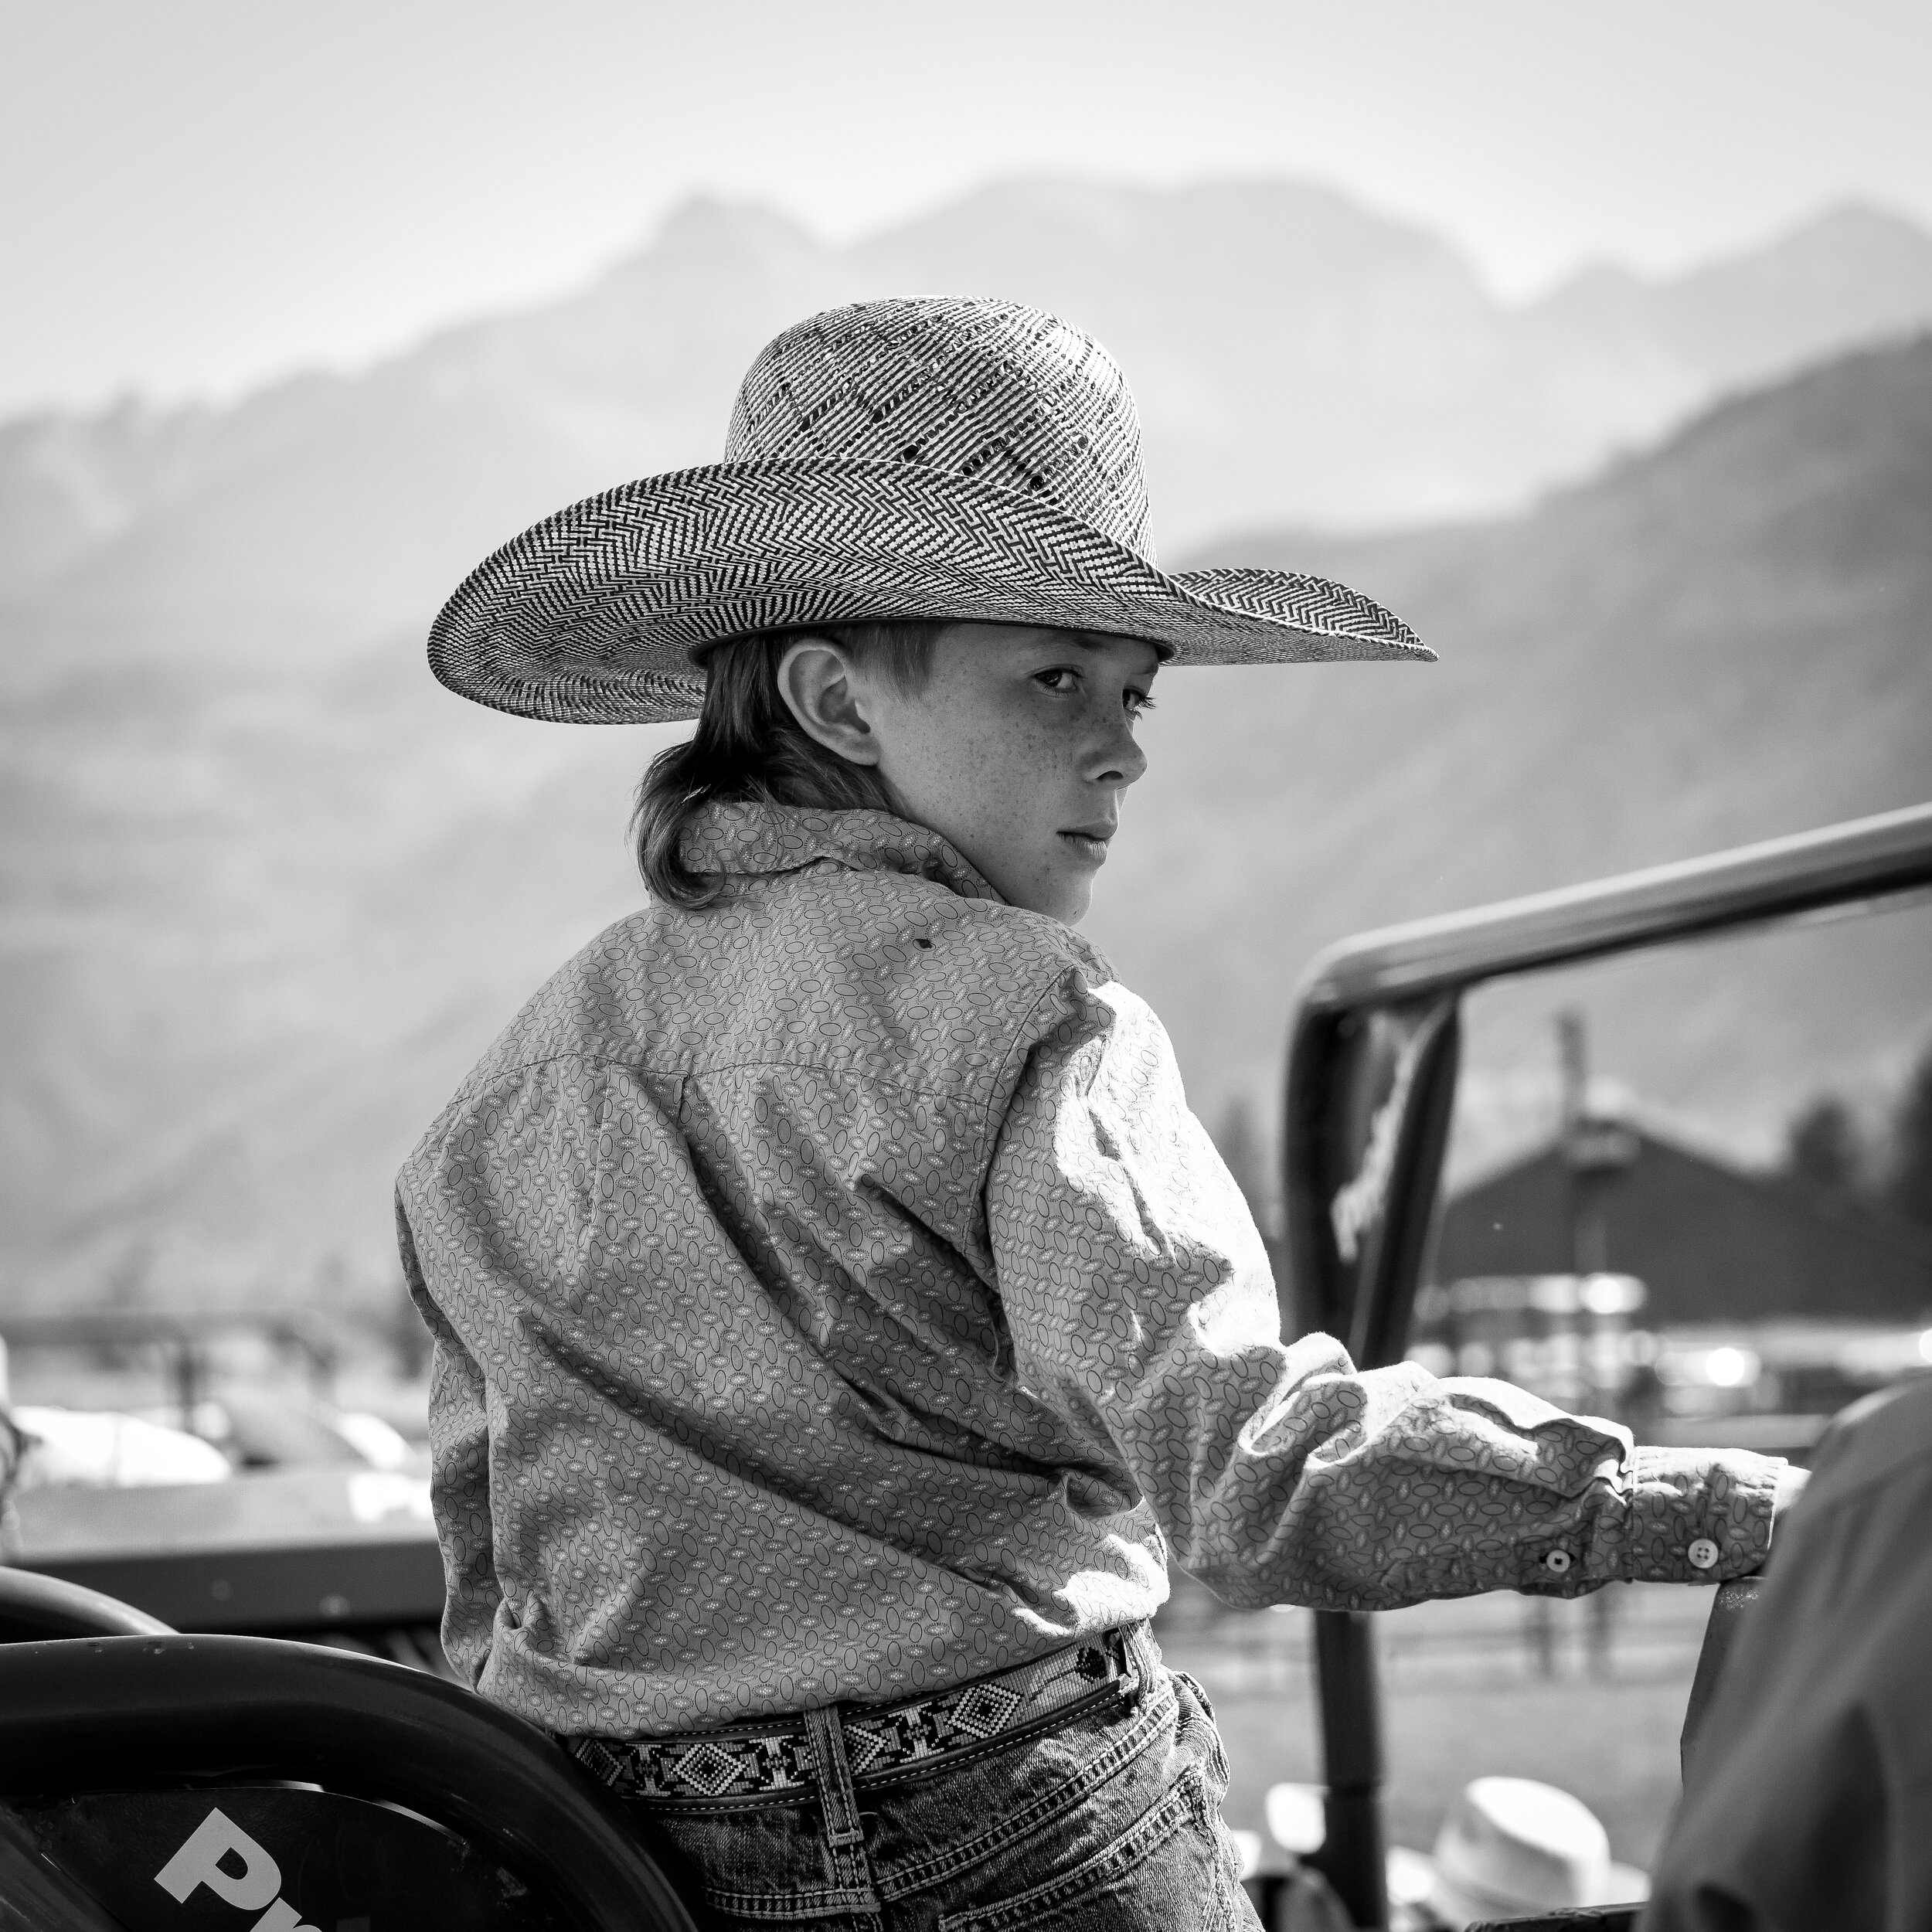  A young Cowboy at the 2021 Ridgeway Rodeo in Colorado  